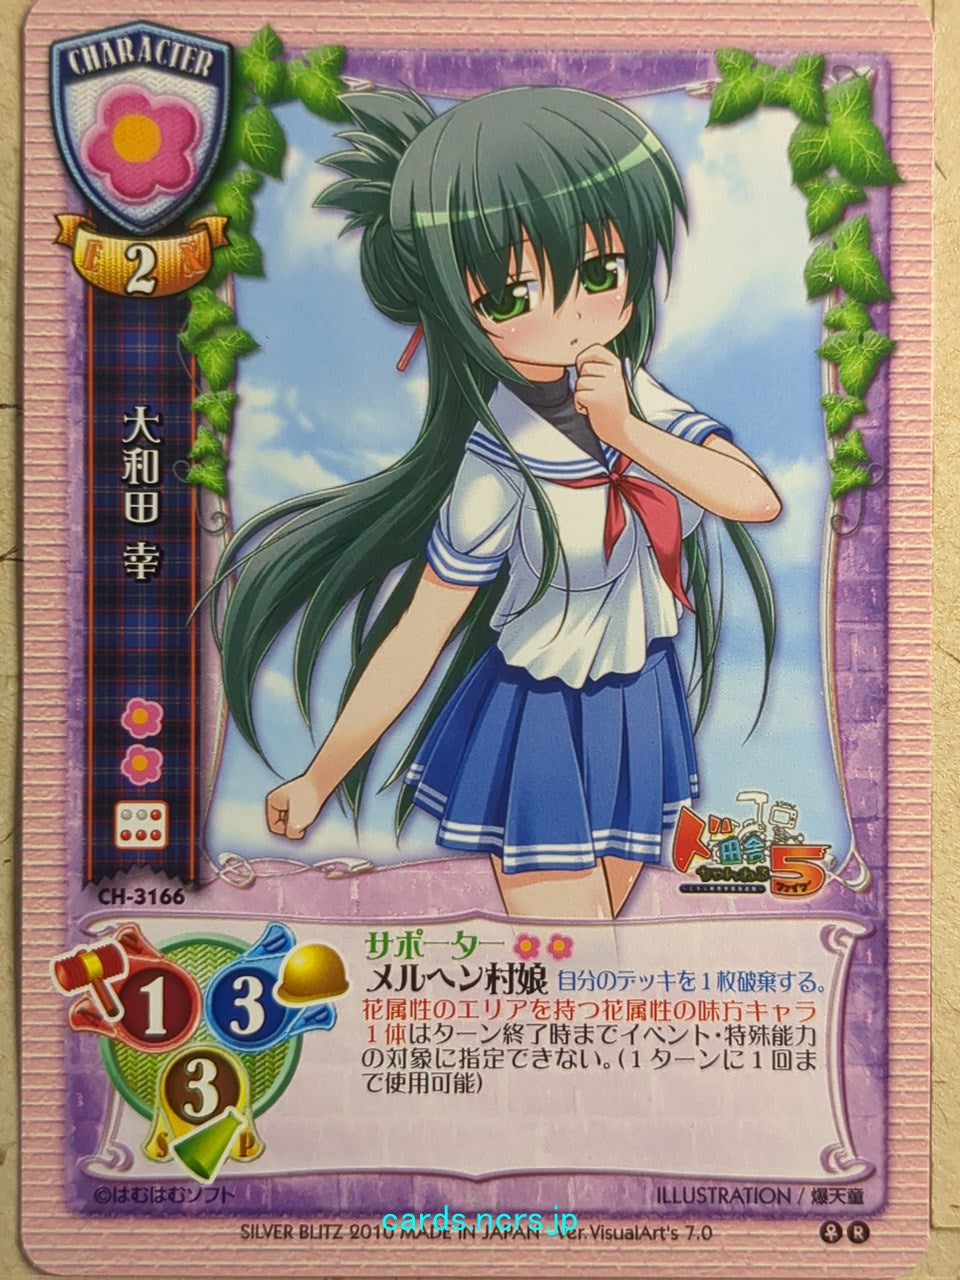 Lycee Do-Inaka Channel 5 -Sachi Oowada-   Trading Card LY/CH-3166